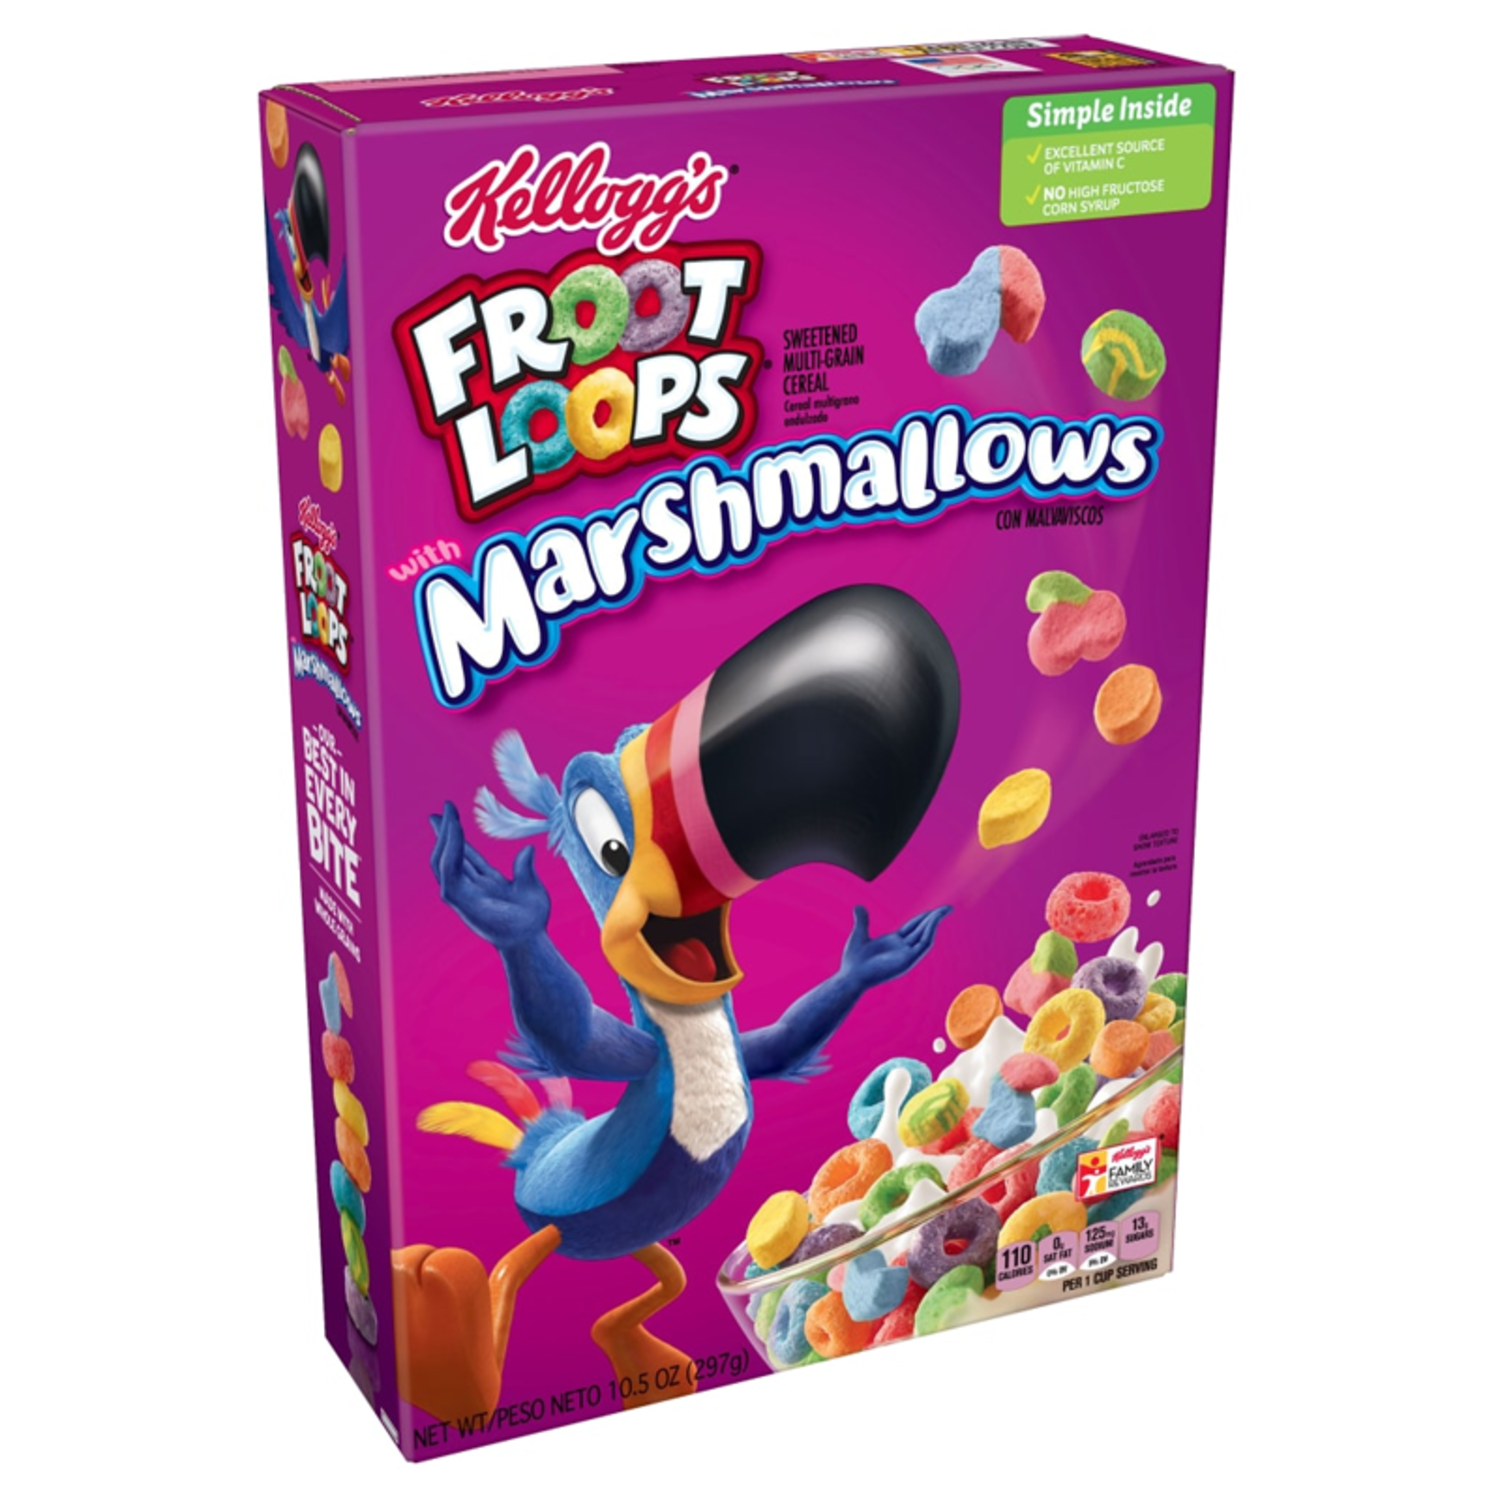 Froot Loops Cereal, Sweetened Multi-Grain, with Marshmallows - Brookshire's